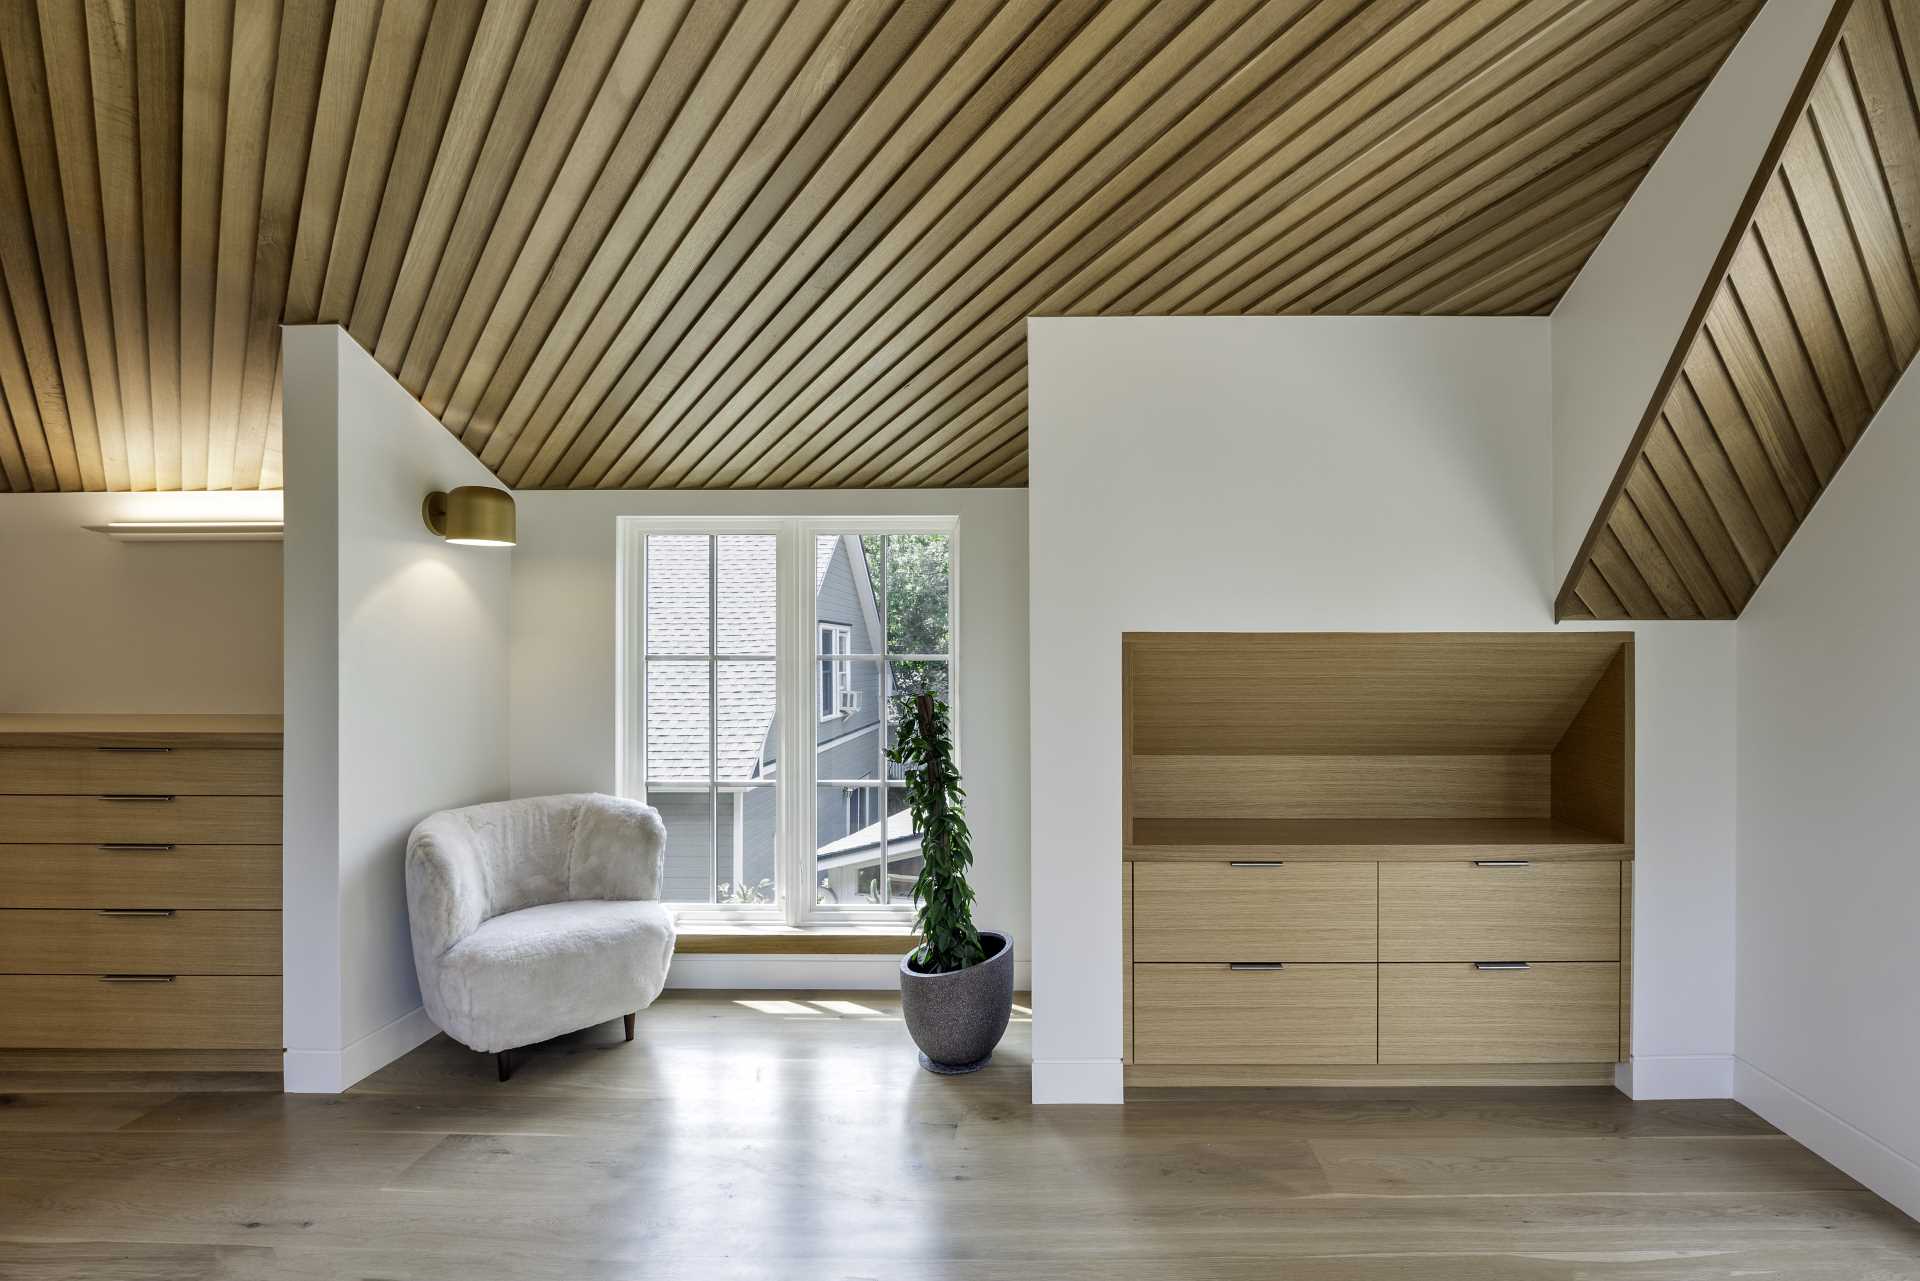 In this main bedroom, the ceiling is composed of lap siding installed at an angle, aligned perfectly at the ridge, while built-in dressers make smart use of the available space.